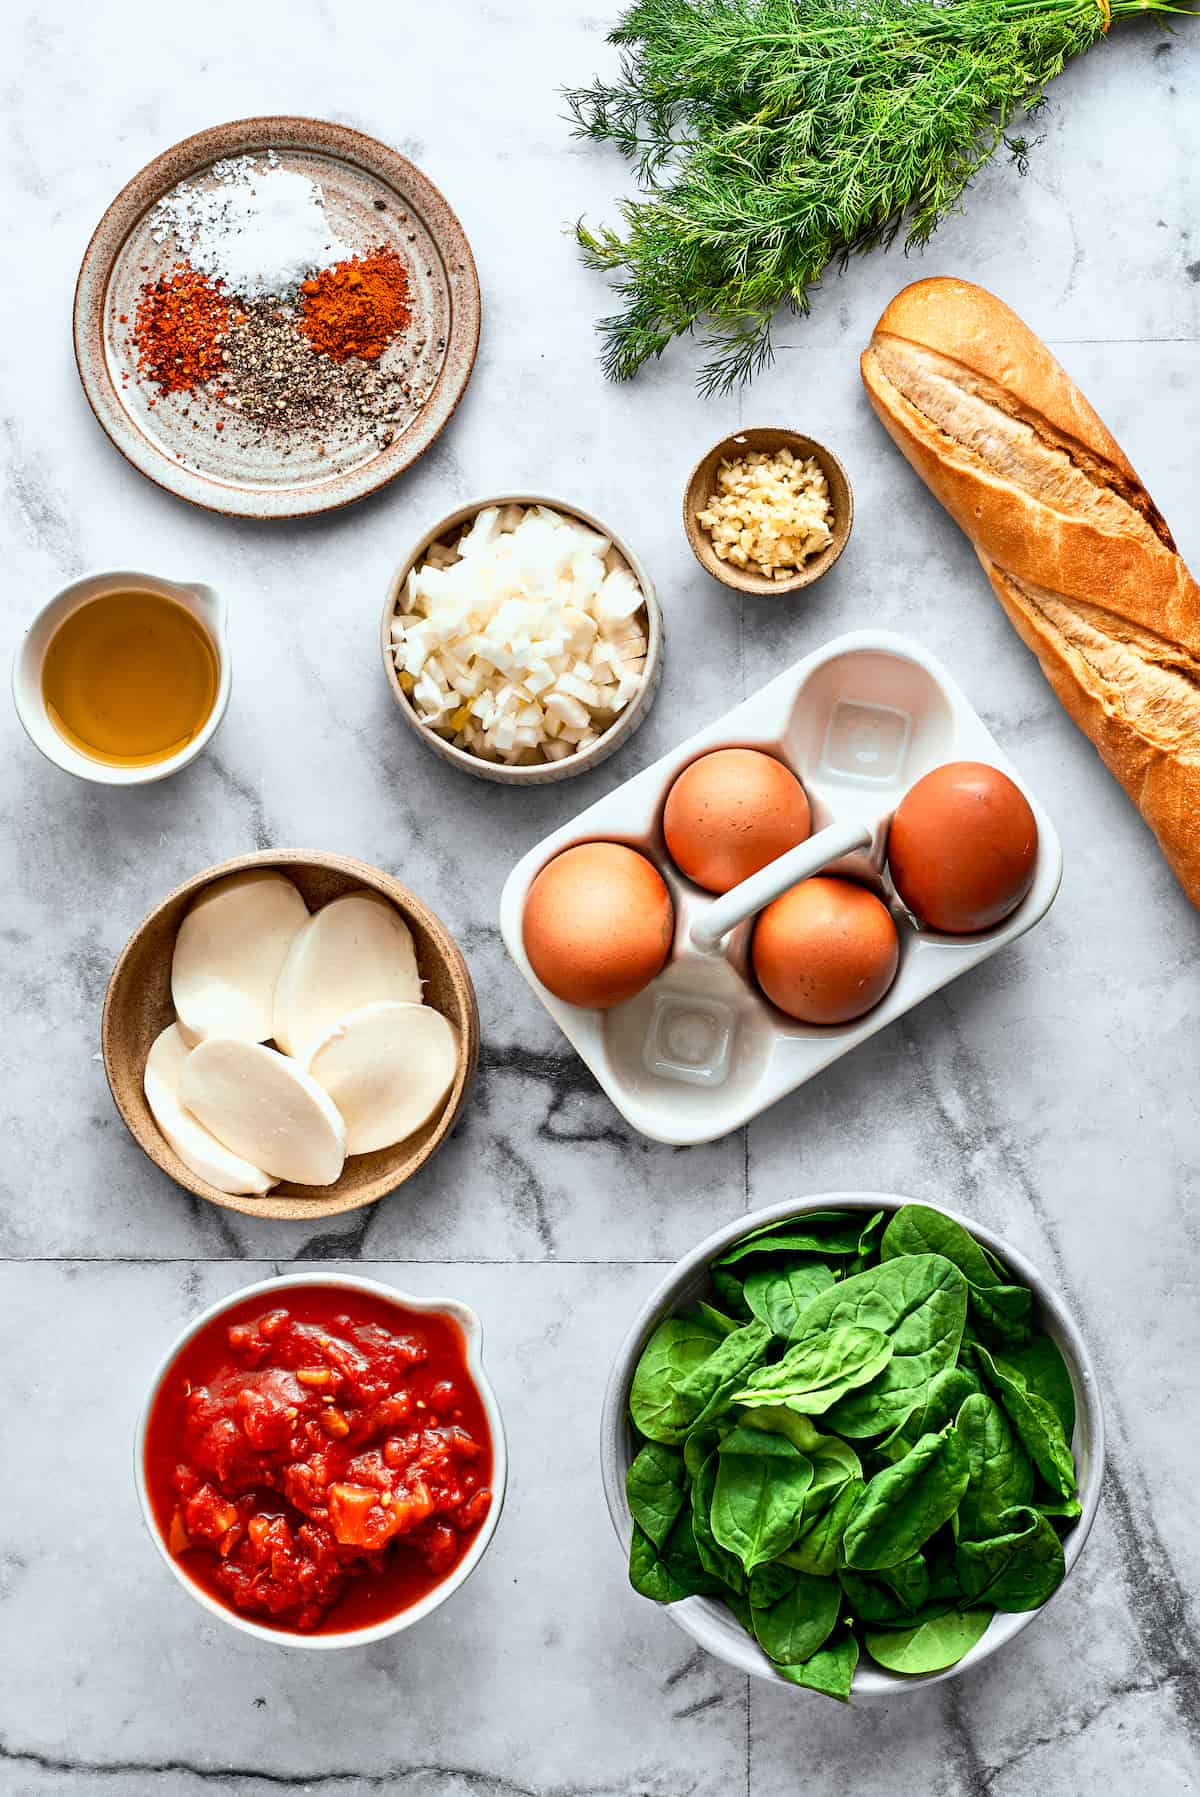 The ingredients for eggs in purgatory are shown on a white background: eggs, bread, fresh mozzarella cheese, spinach, diced tomatoes, garlic, olive oil, spices, dill.